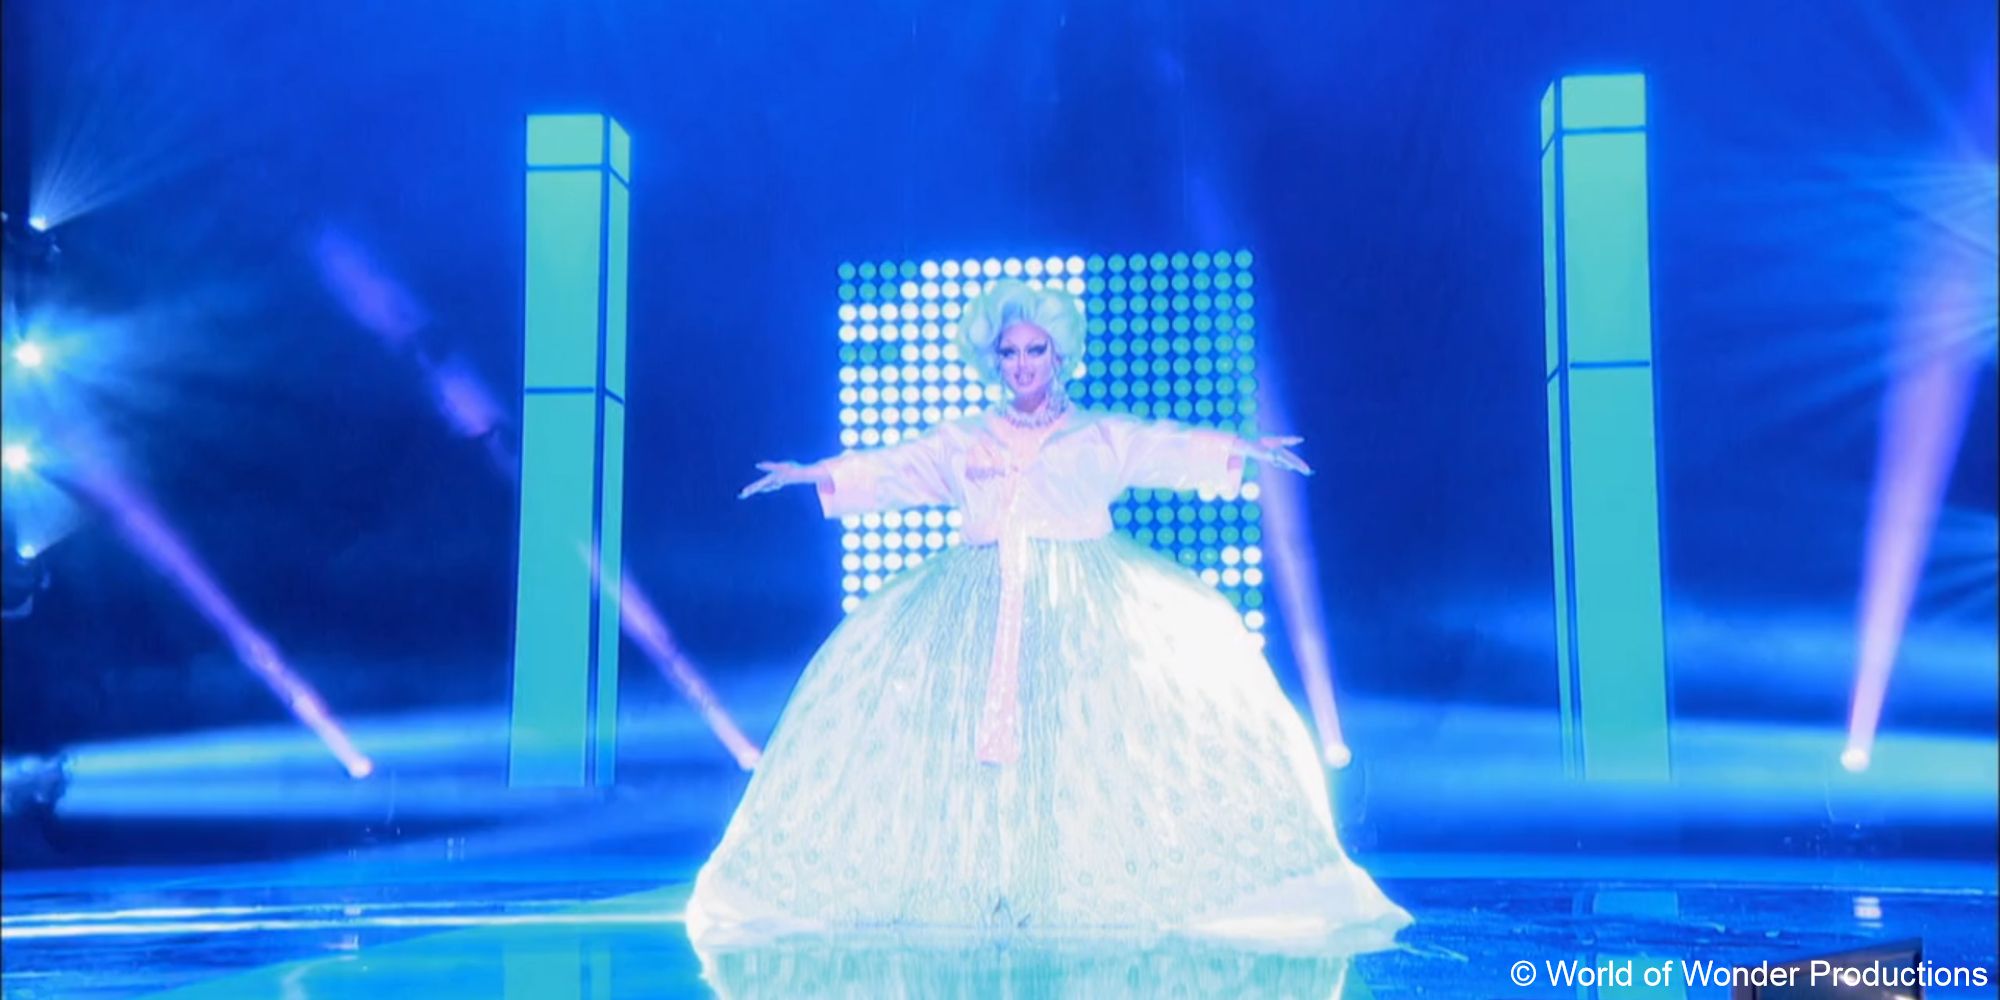 A still of drag queen Kim Chi wearing a luminescent blue and white ball gown, arms spread wide